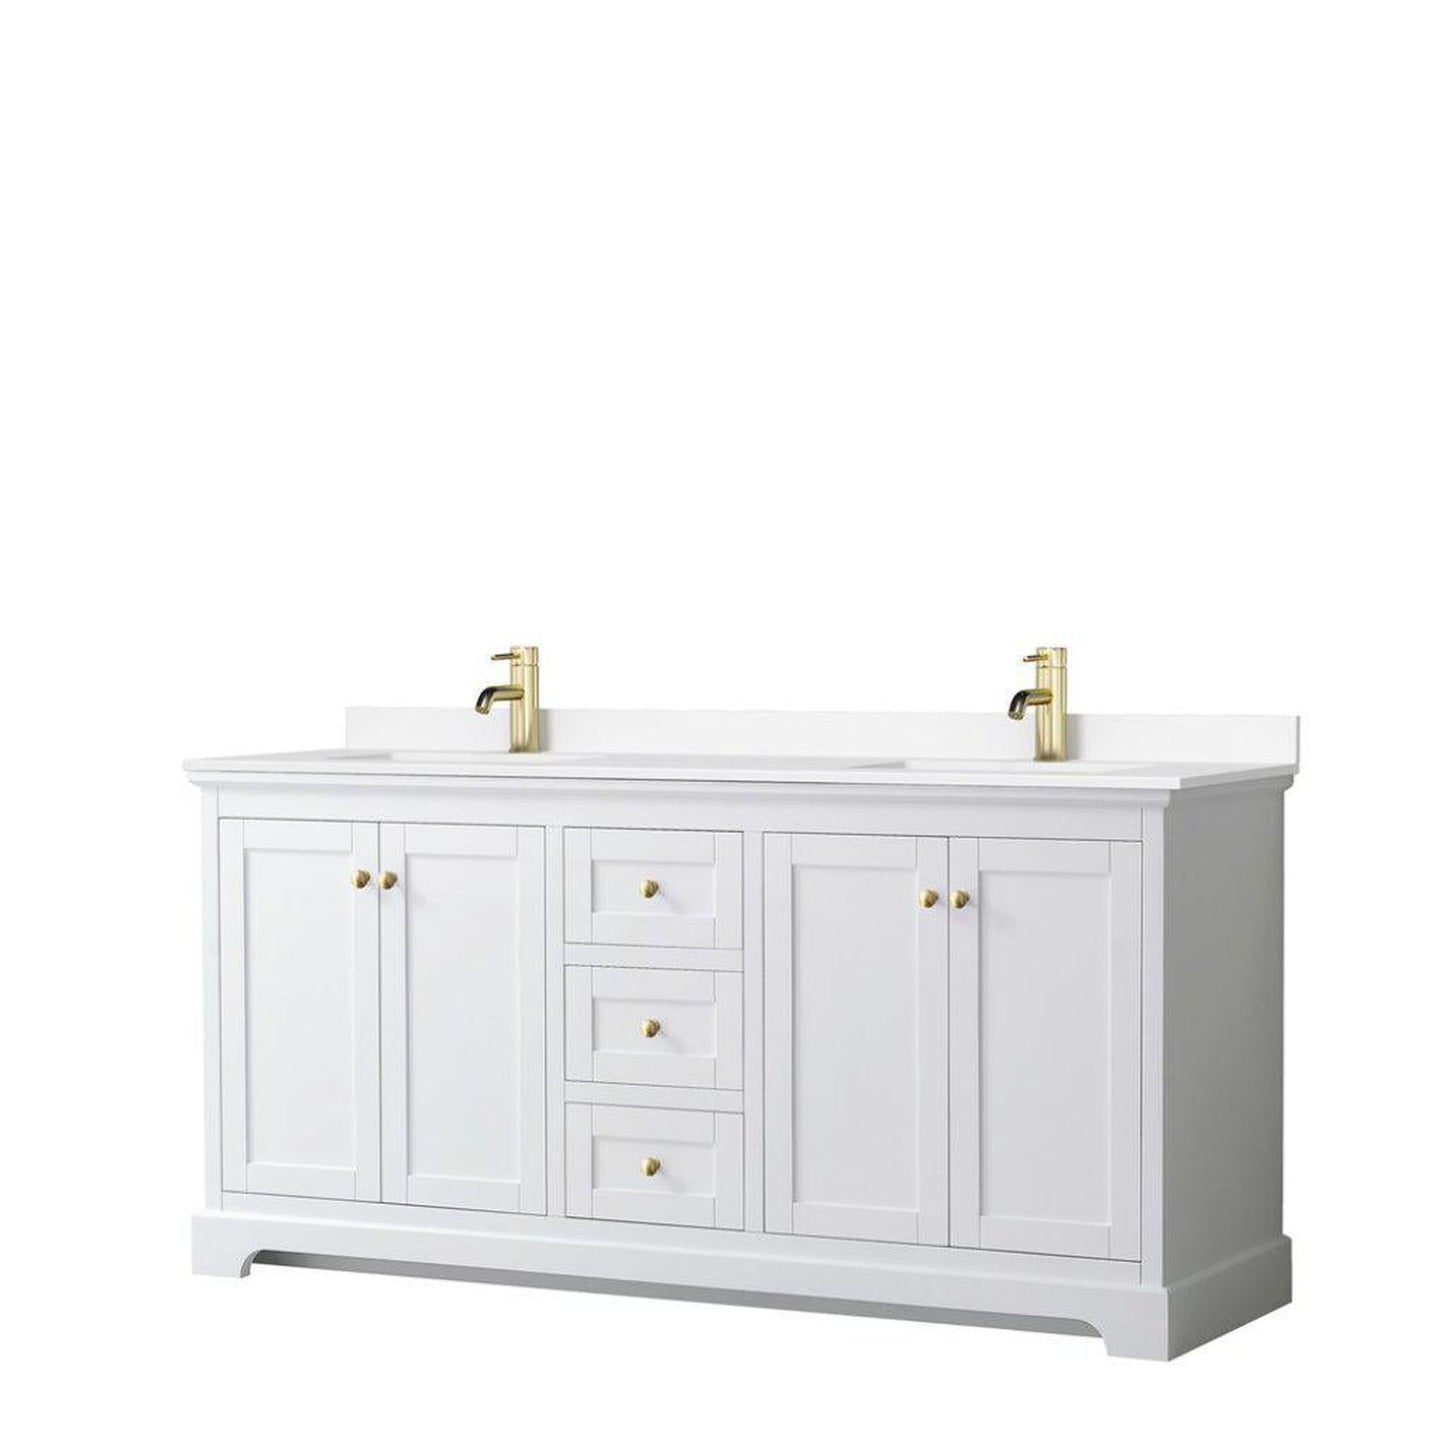 Wyndham Collection Avery 72" White Double Bathroom Vanity, White Cultured Marble Countertop With 1-Hole Faucet, Square Sink, Gold Trims